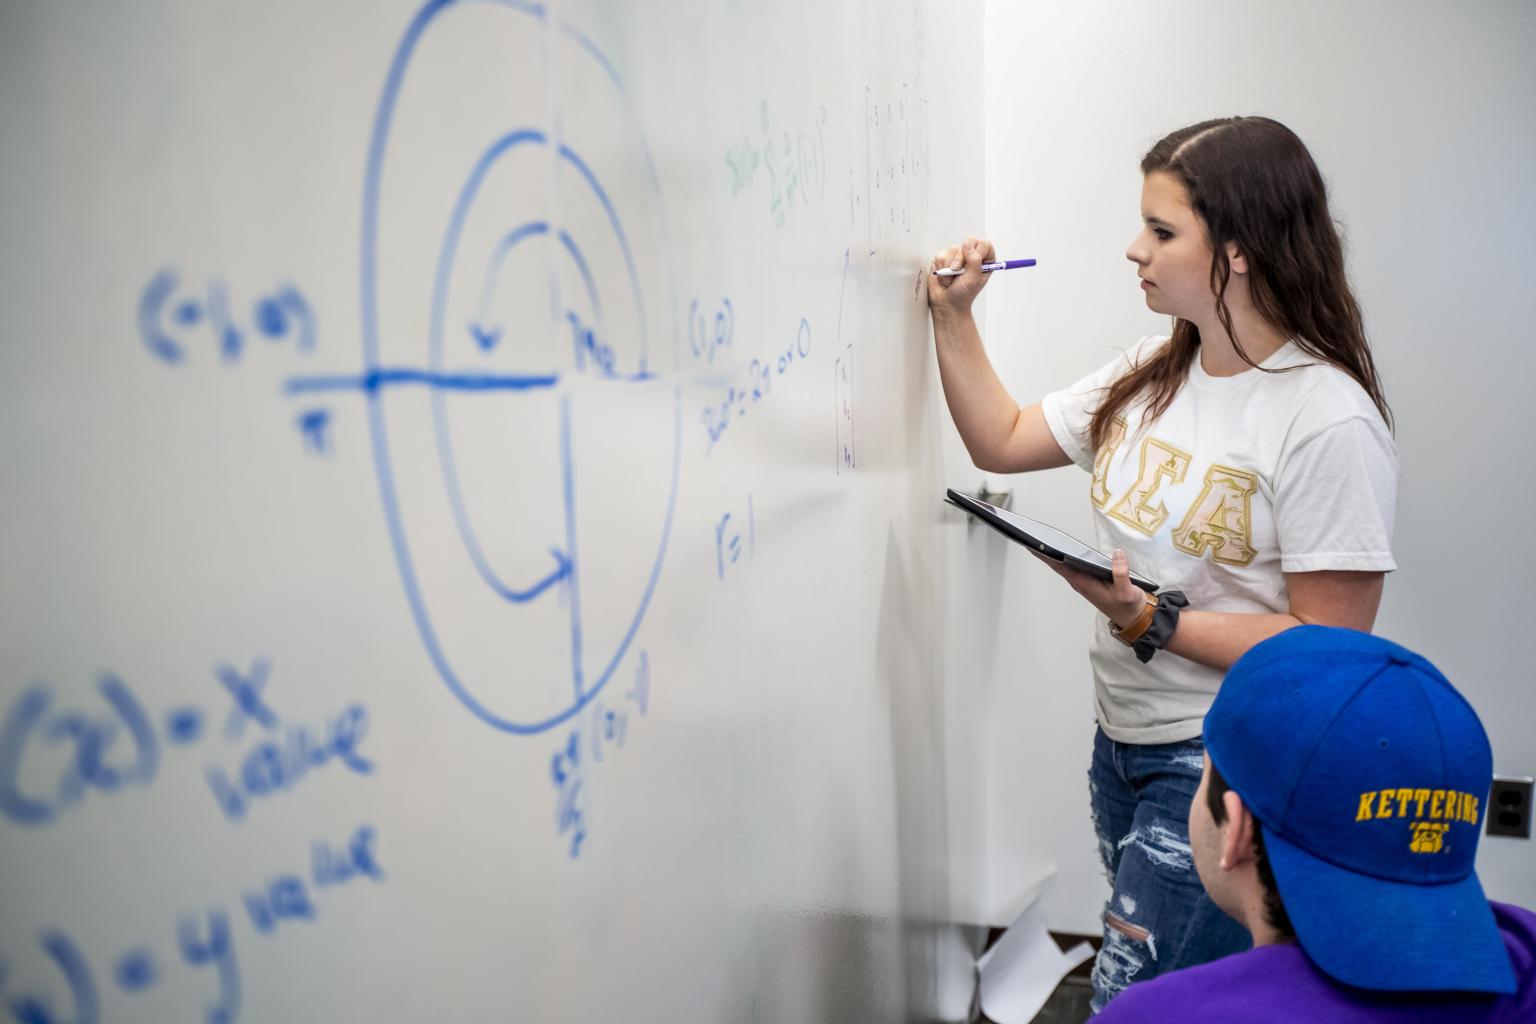 A student works on a homework problem at a white board in a dspace.